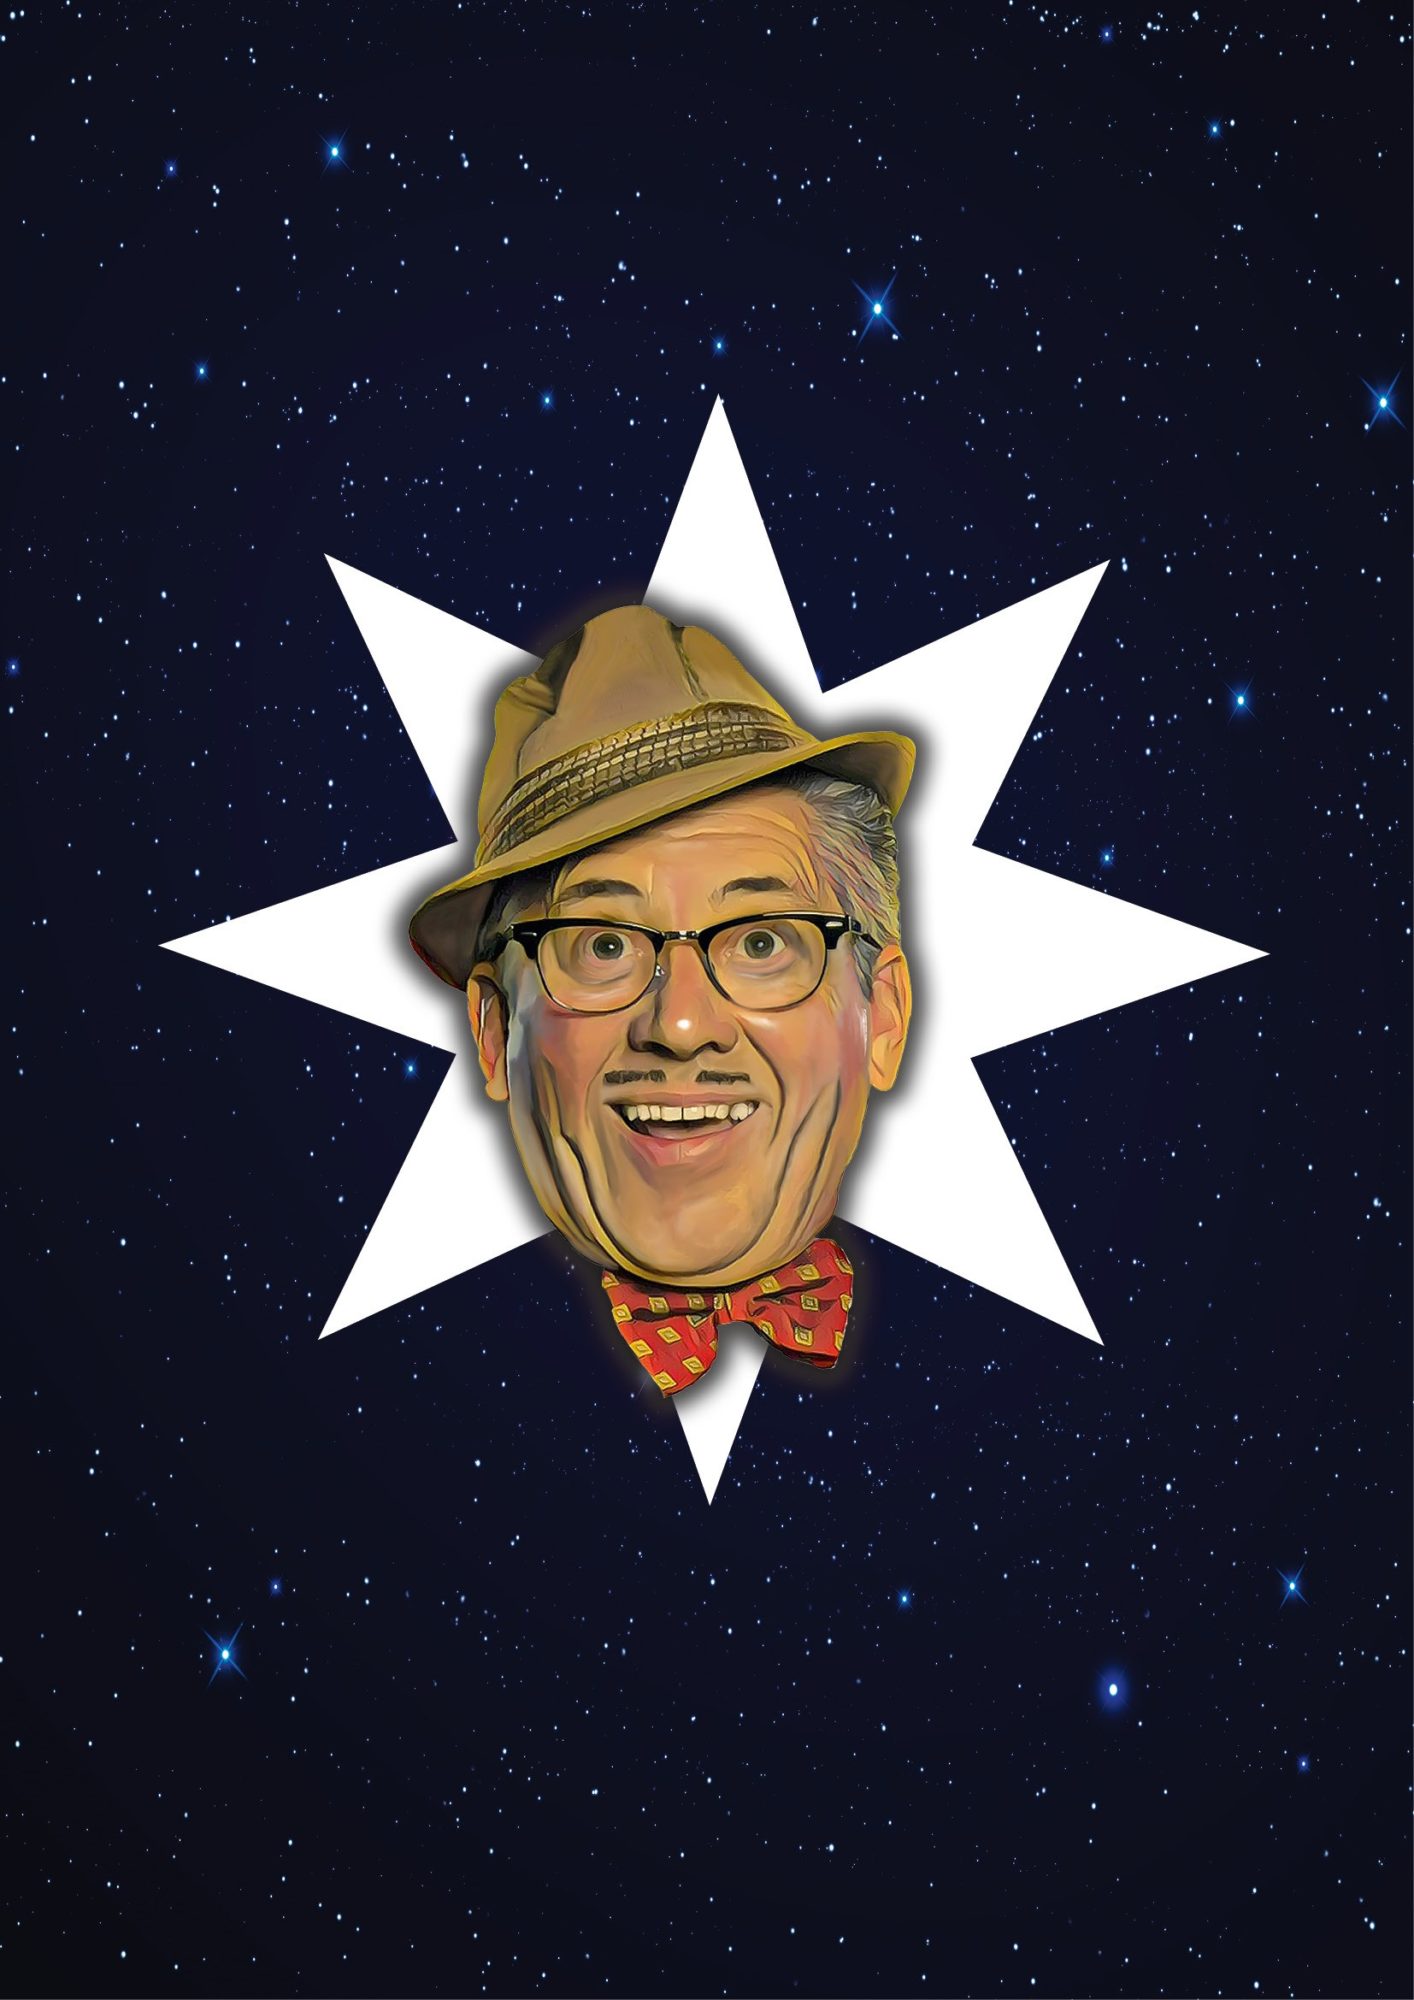 Aberdeen International Comedy Festival 2019: Count Arthur Strong- 'Is There Anybody Out There?'